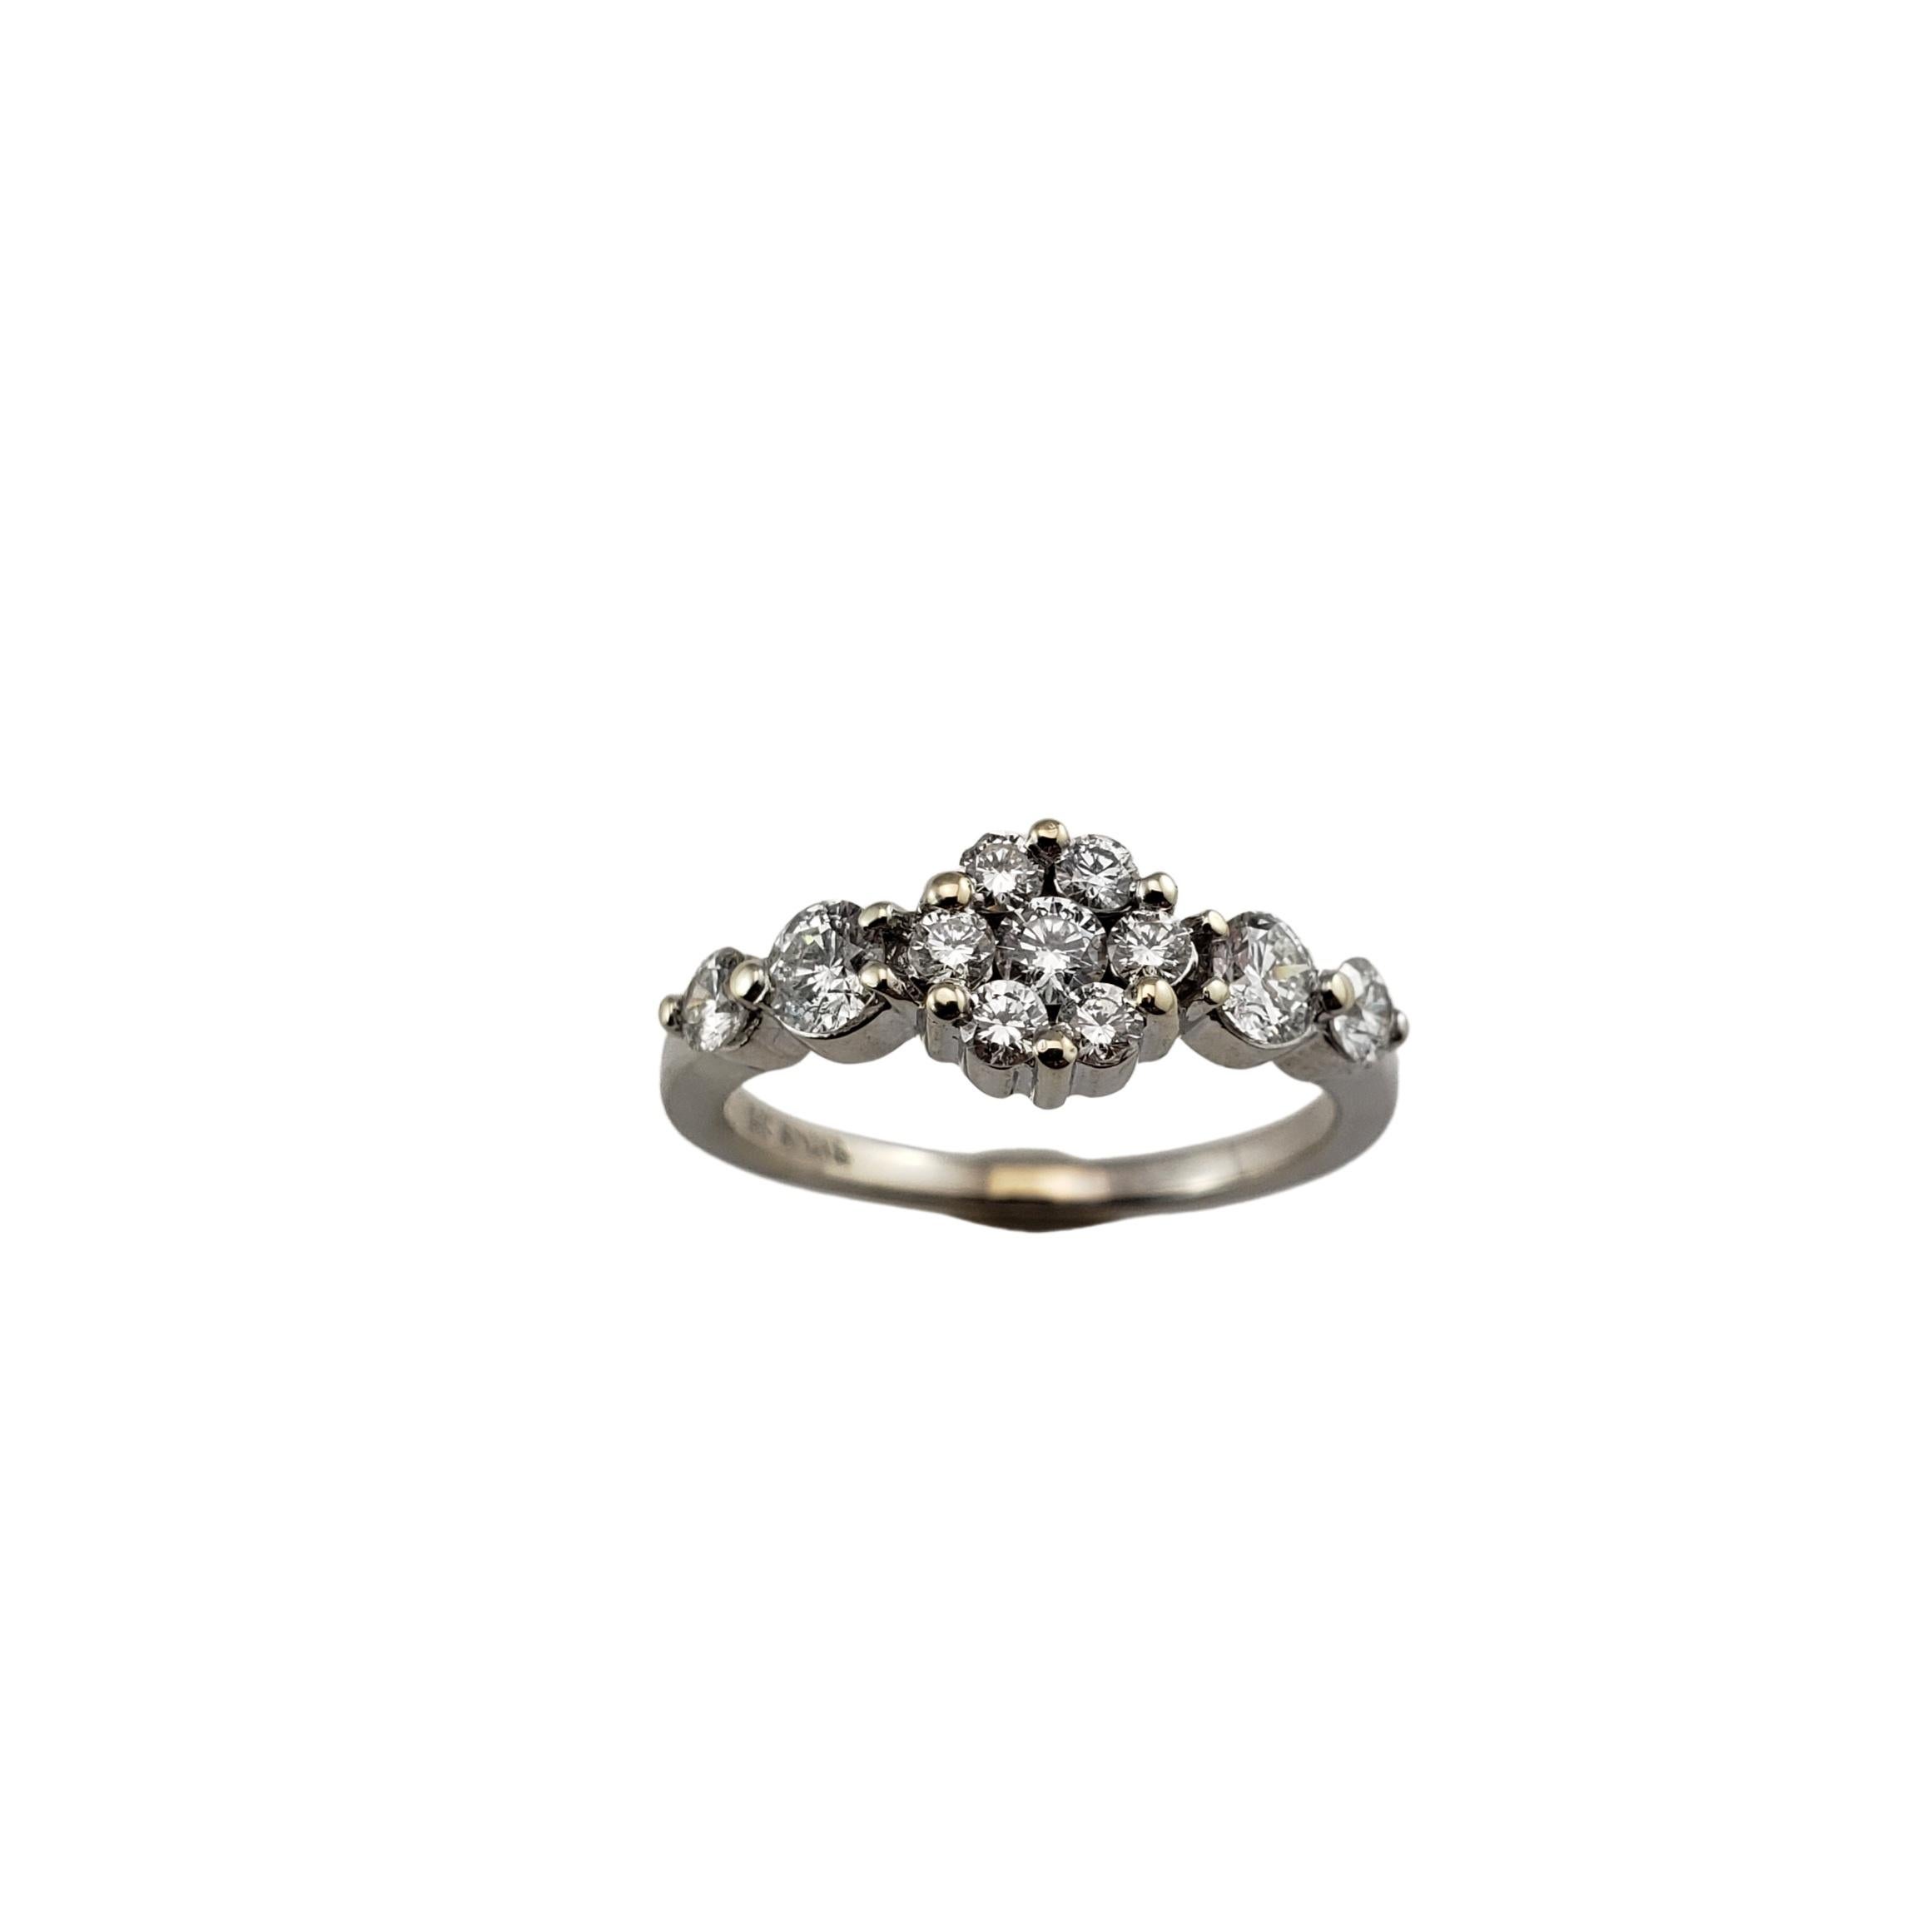 Vintage 14 Karat White Gold and Diamond Ring Size 6.25-

This sparkling flower ring features 11 round brilliant cut diamonds set in beautifully detailed 14K white gold. Shank: 2 mm.

Approximate total diamond weight: .63 ct.

Diamond color: